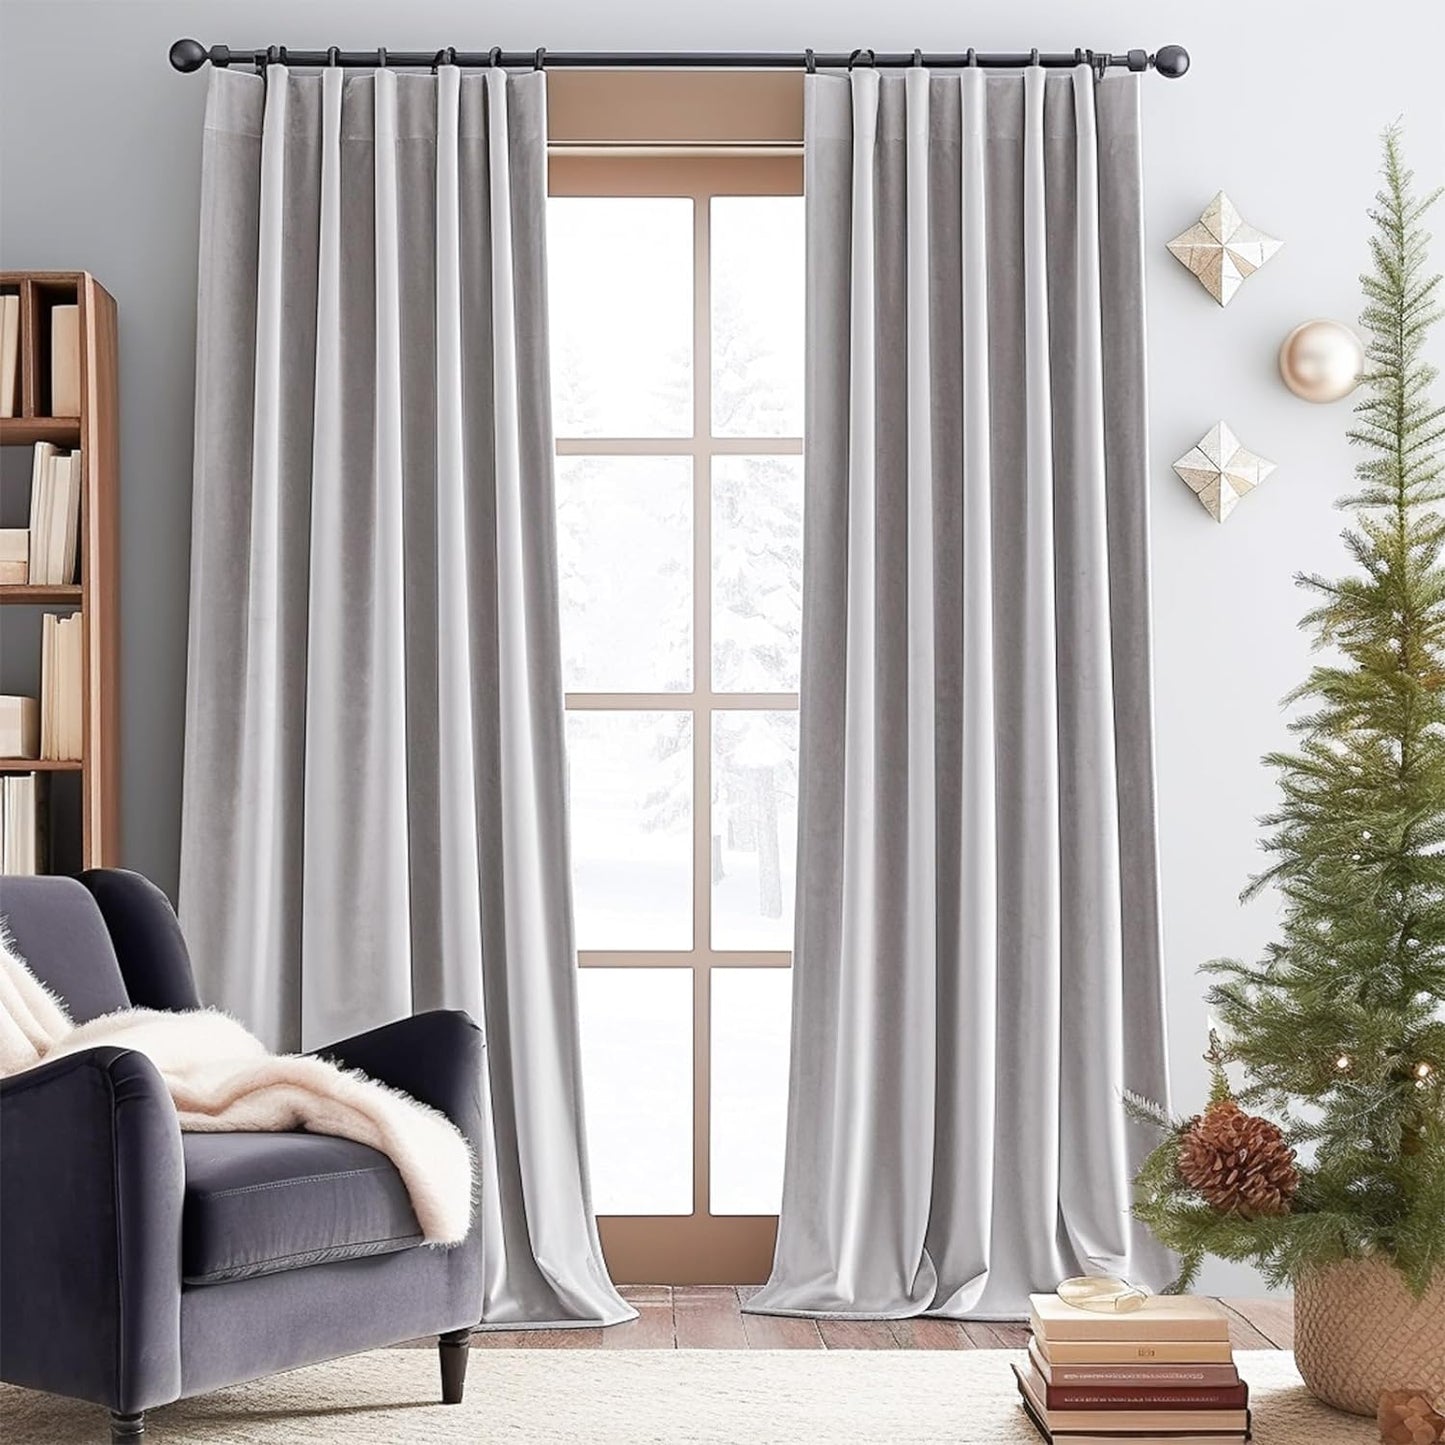 Lazzzy Velvet Blackout Curtains Brown Thermal Insulated Curtains 84 Room Darkening Window Drapes Super Soft Luxury Curtains for Living Room Bedroom Rod Pocket 2 Panels 84 Inch Long Gold Brown  TOPICK Light Gray W52 X L96 